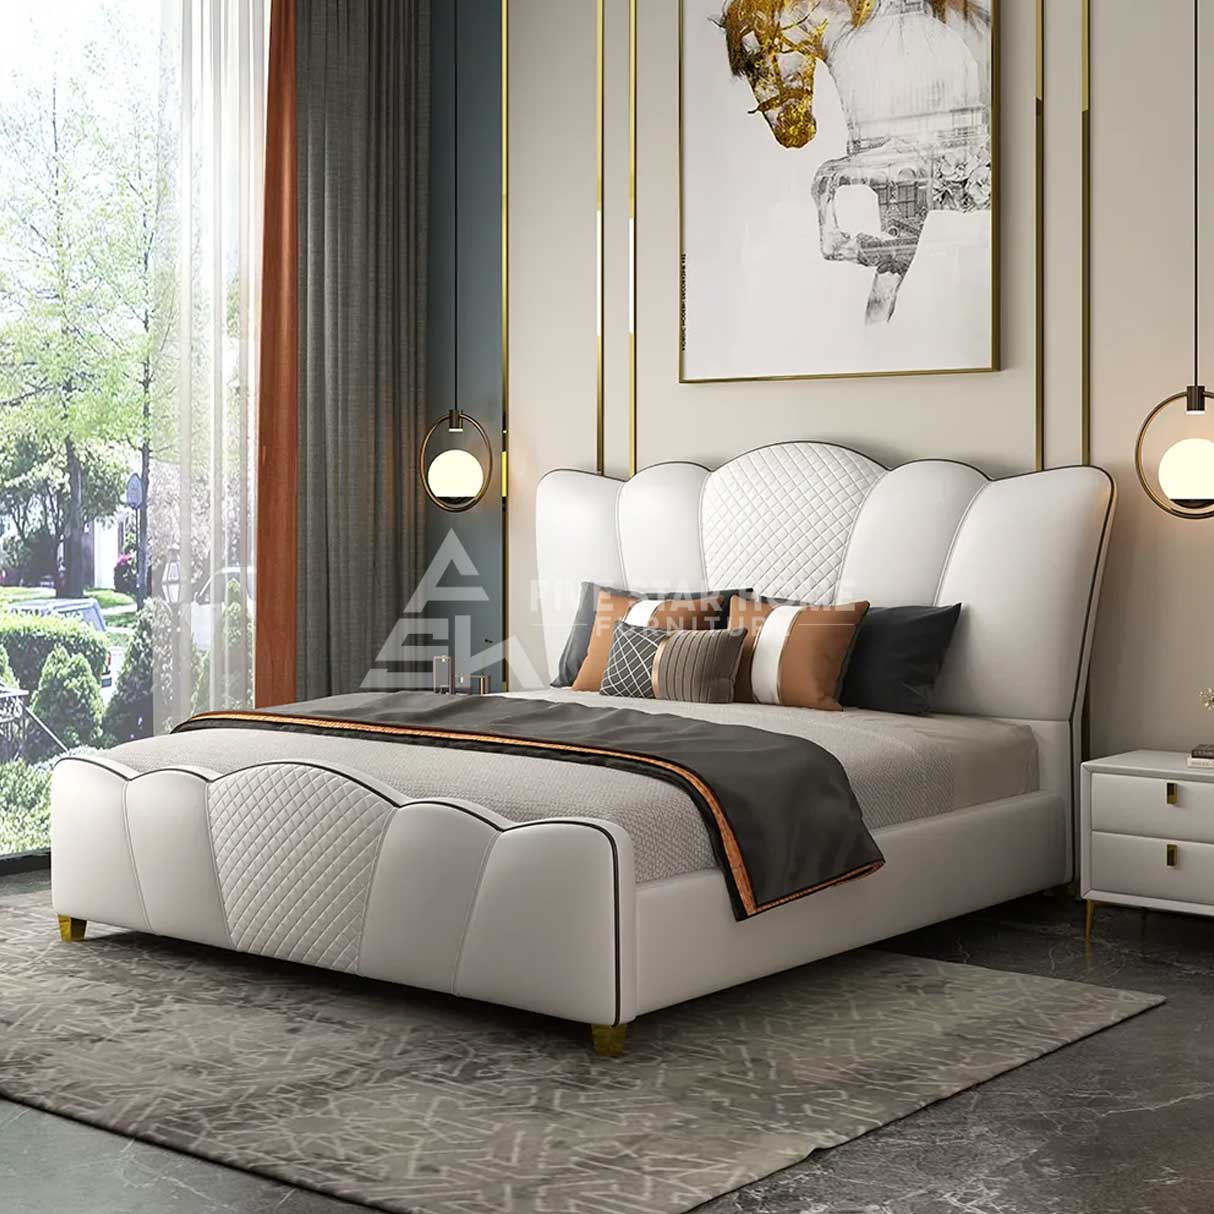 Platform Bed With Curved Headboard